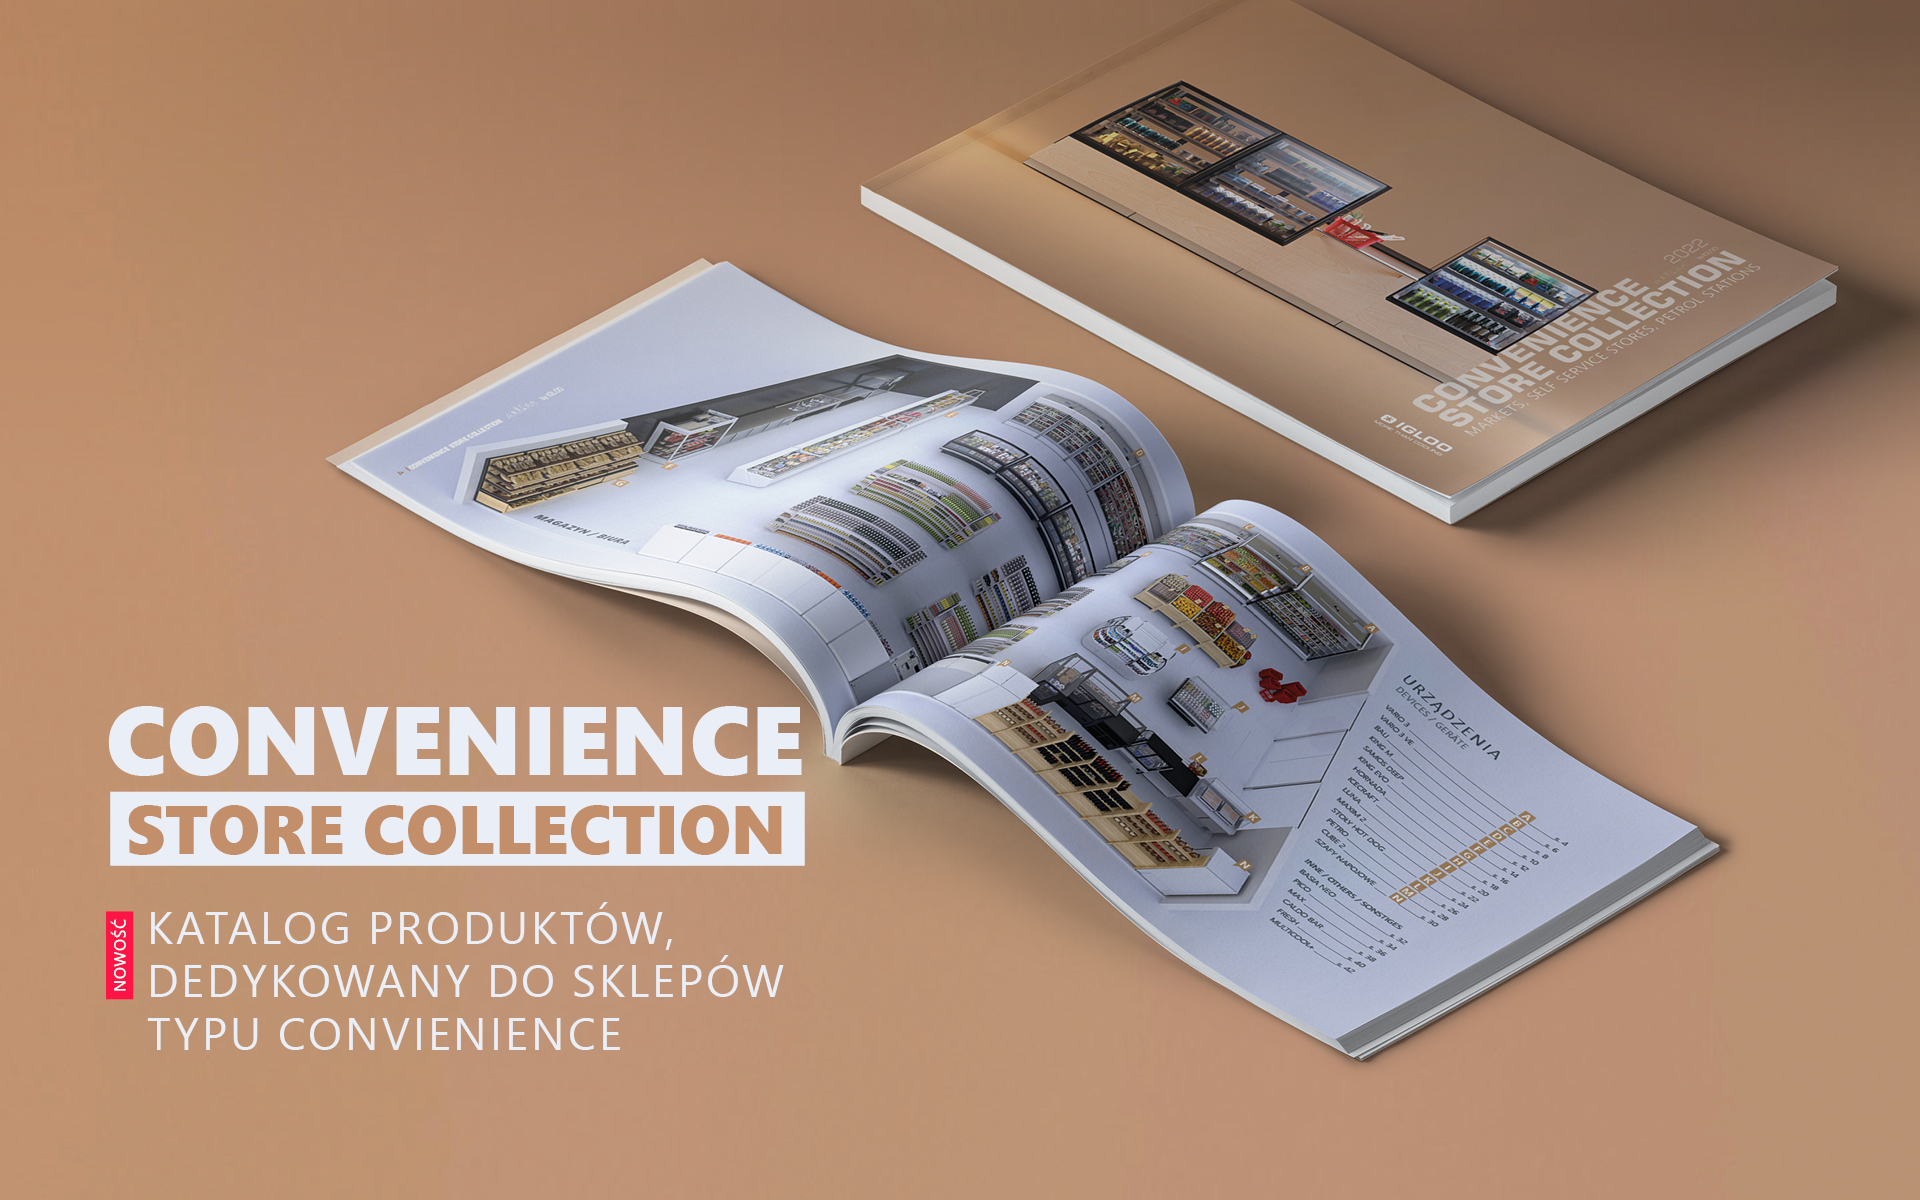 Product catalog, dedicated to CONVENIENCE stores